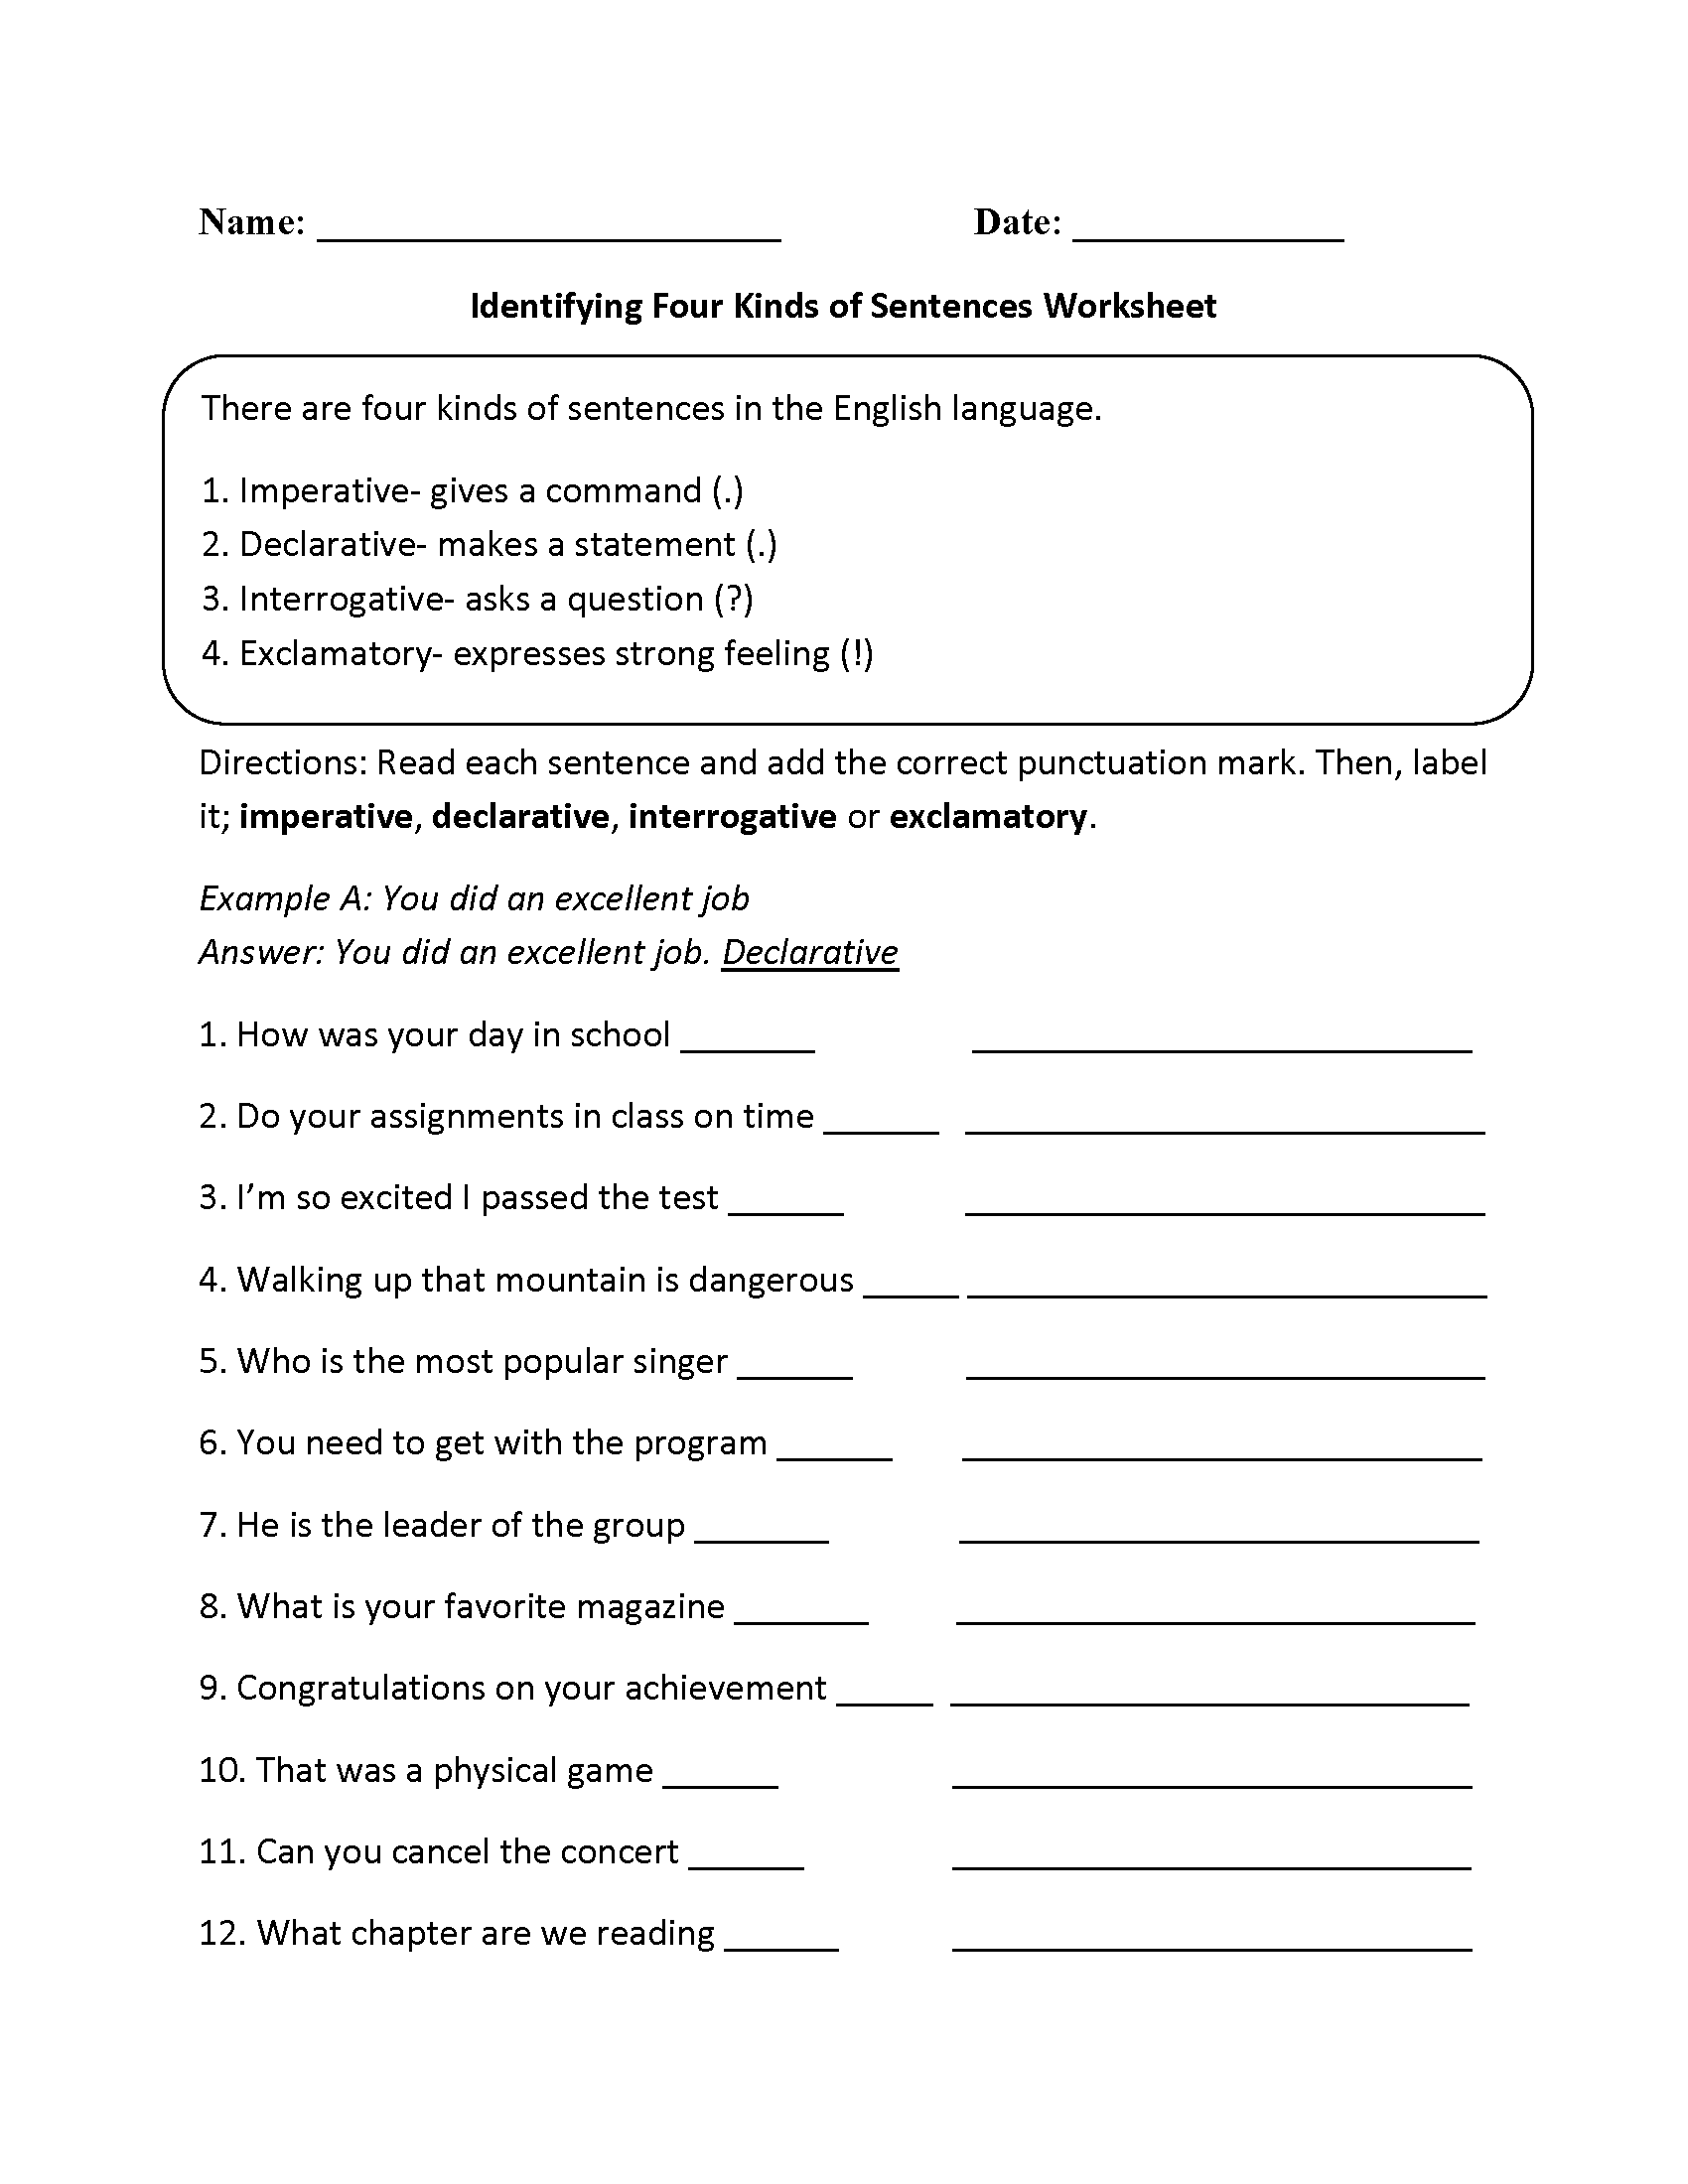 Four Kinds Of Sentences Worksheet Answers